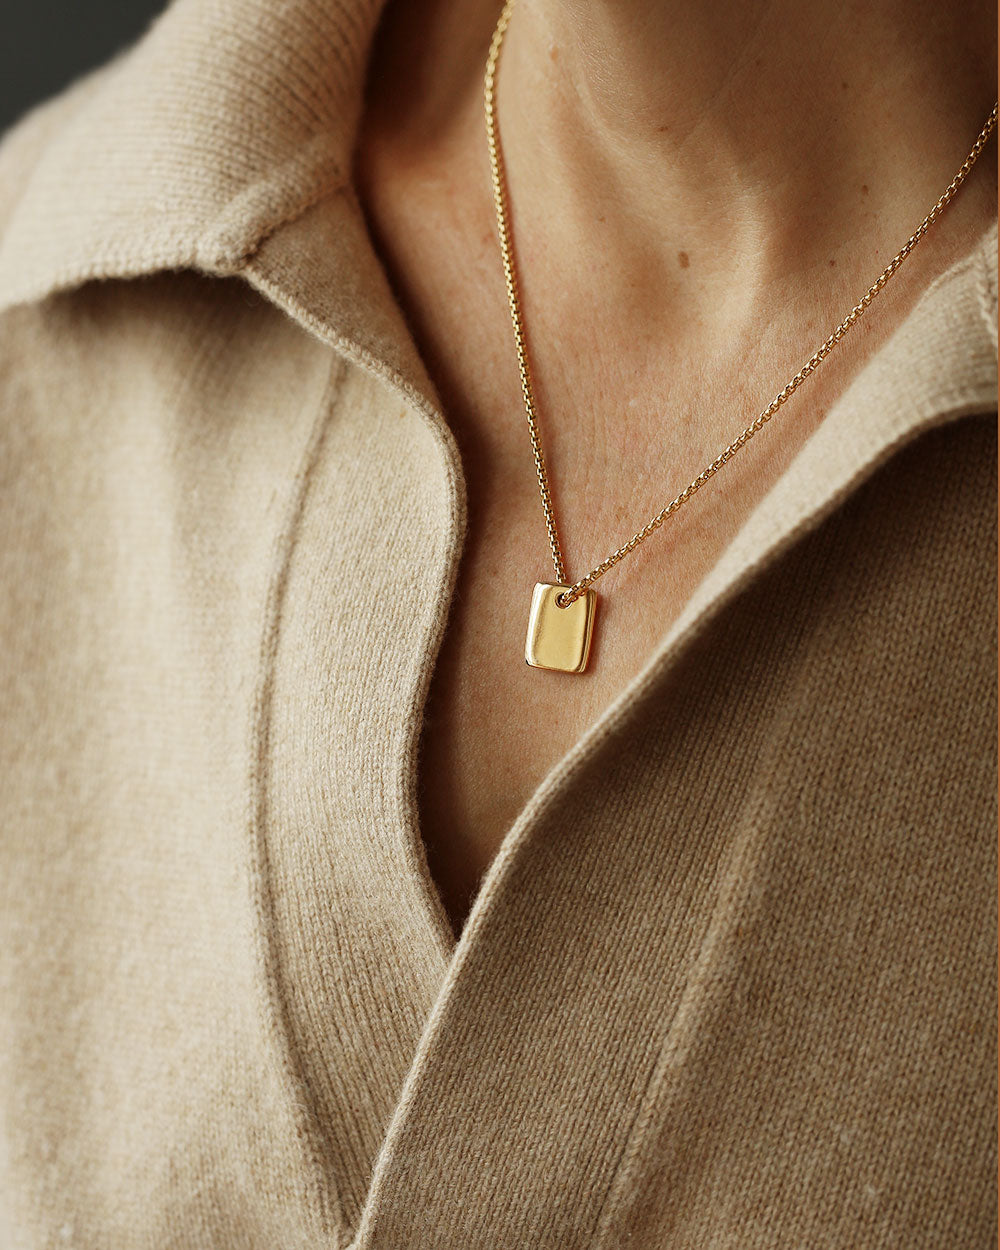 9ct Gold Heart And Tag Necklace By Posh Totty Designs |  notonthehighstreet.com